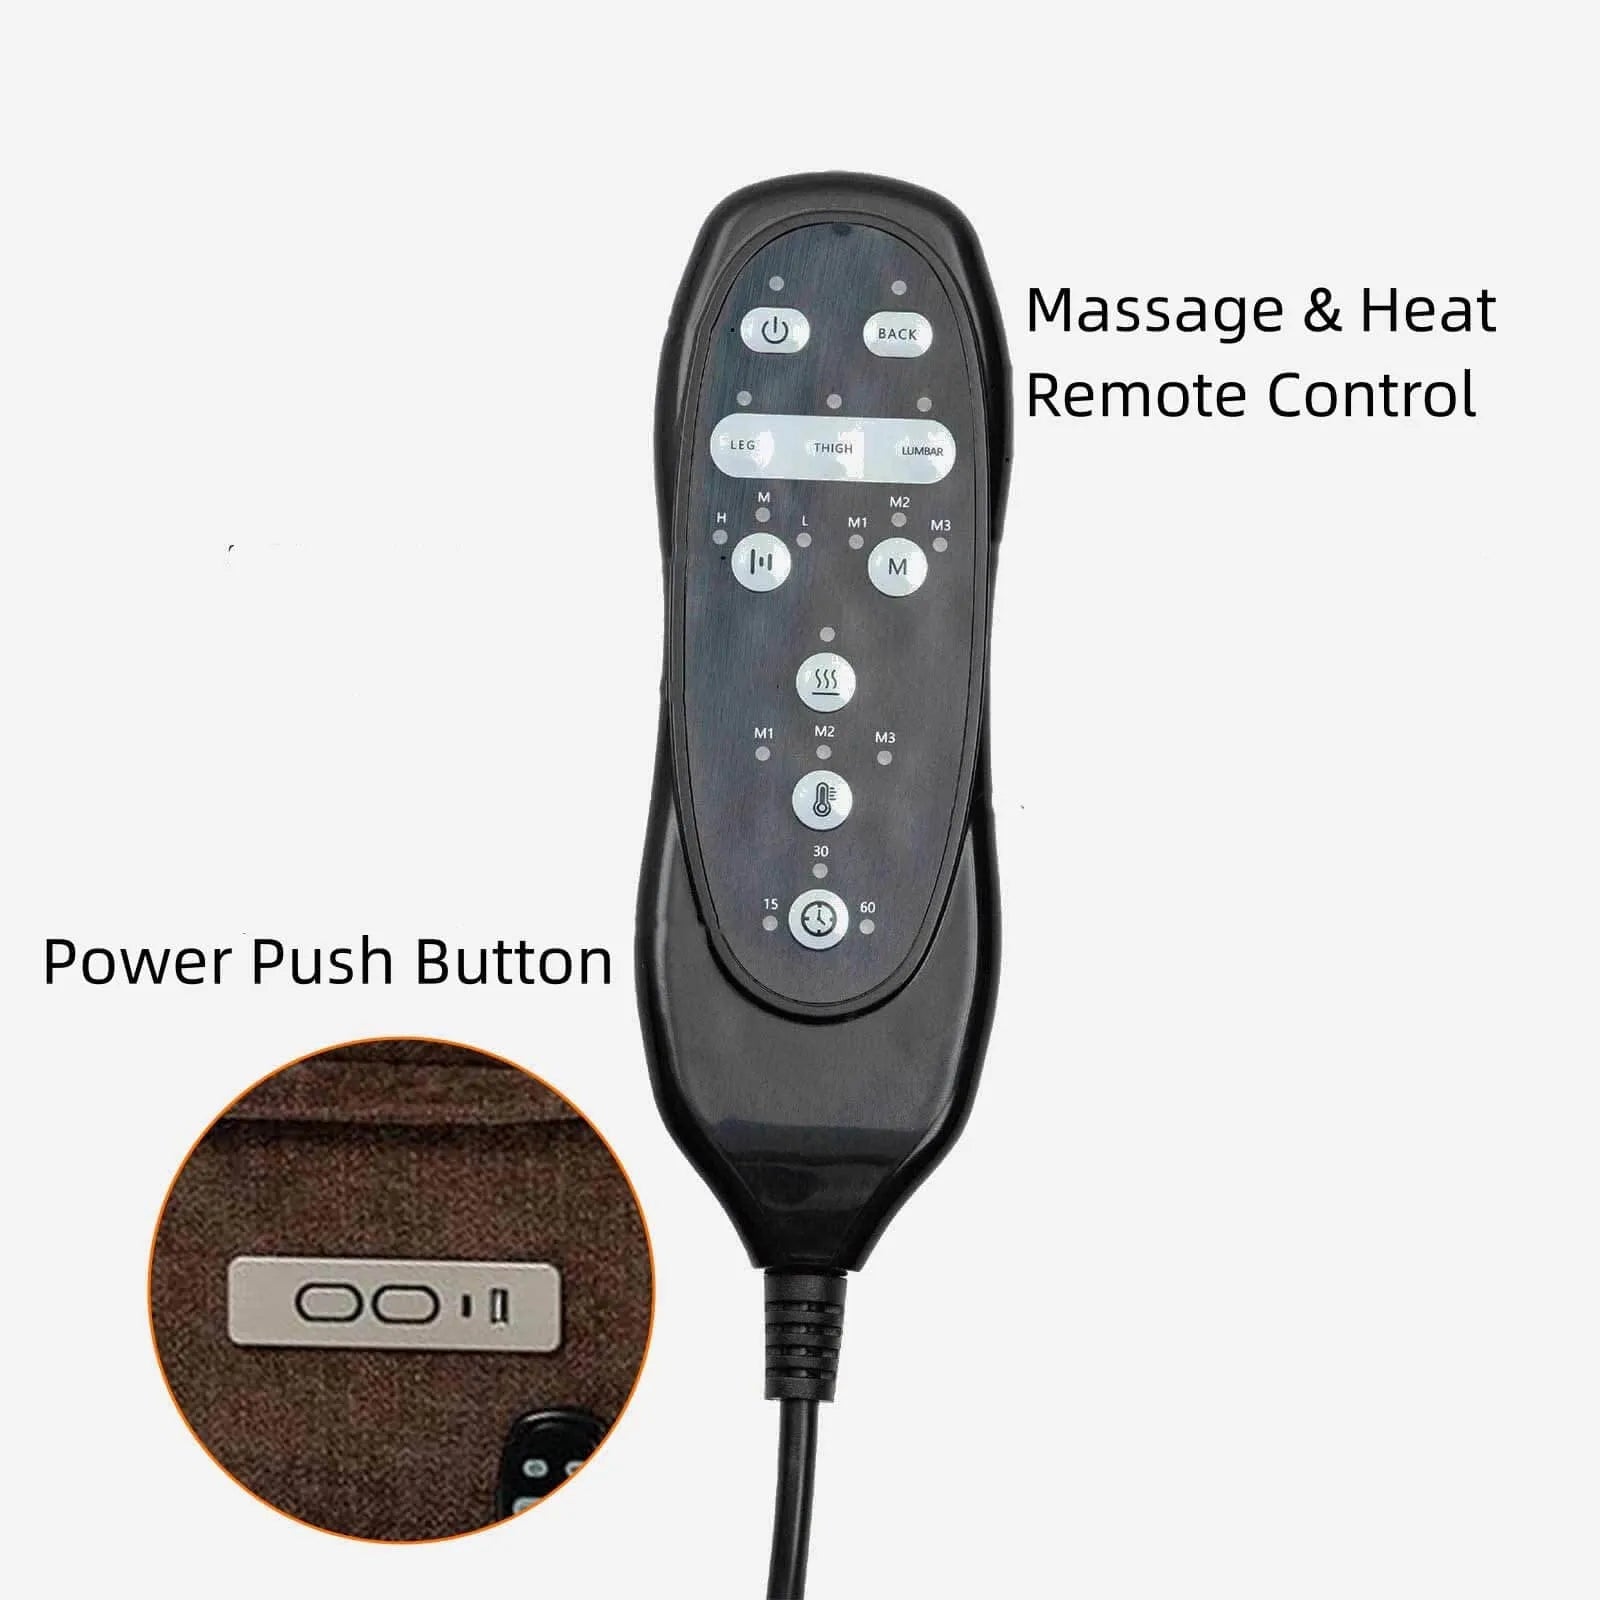 Power push button and remote control of lift chair